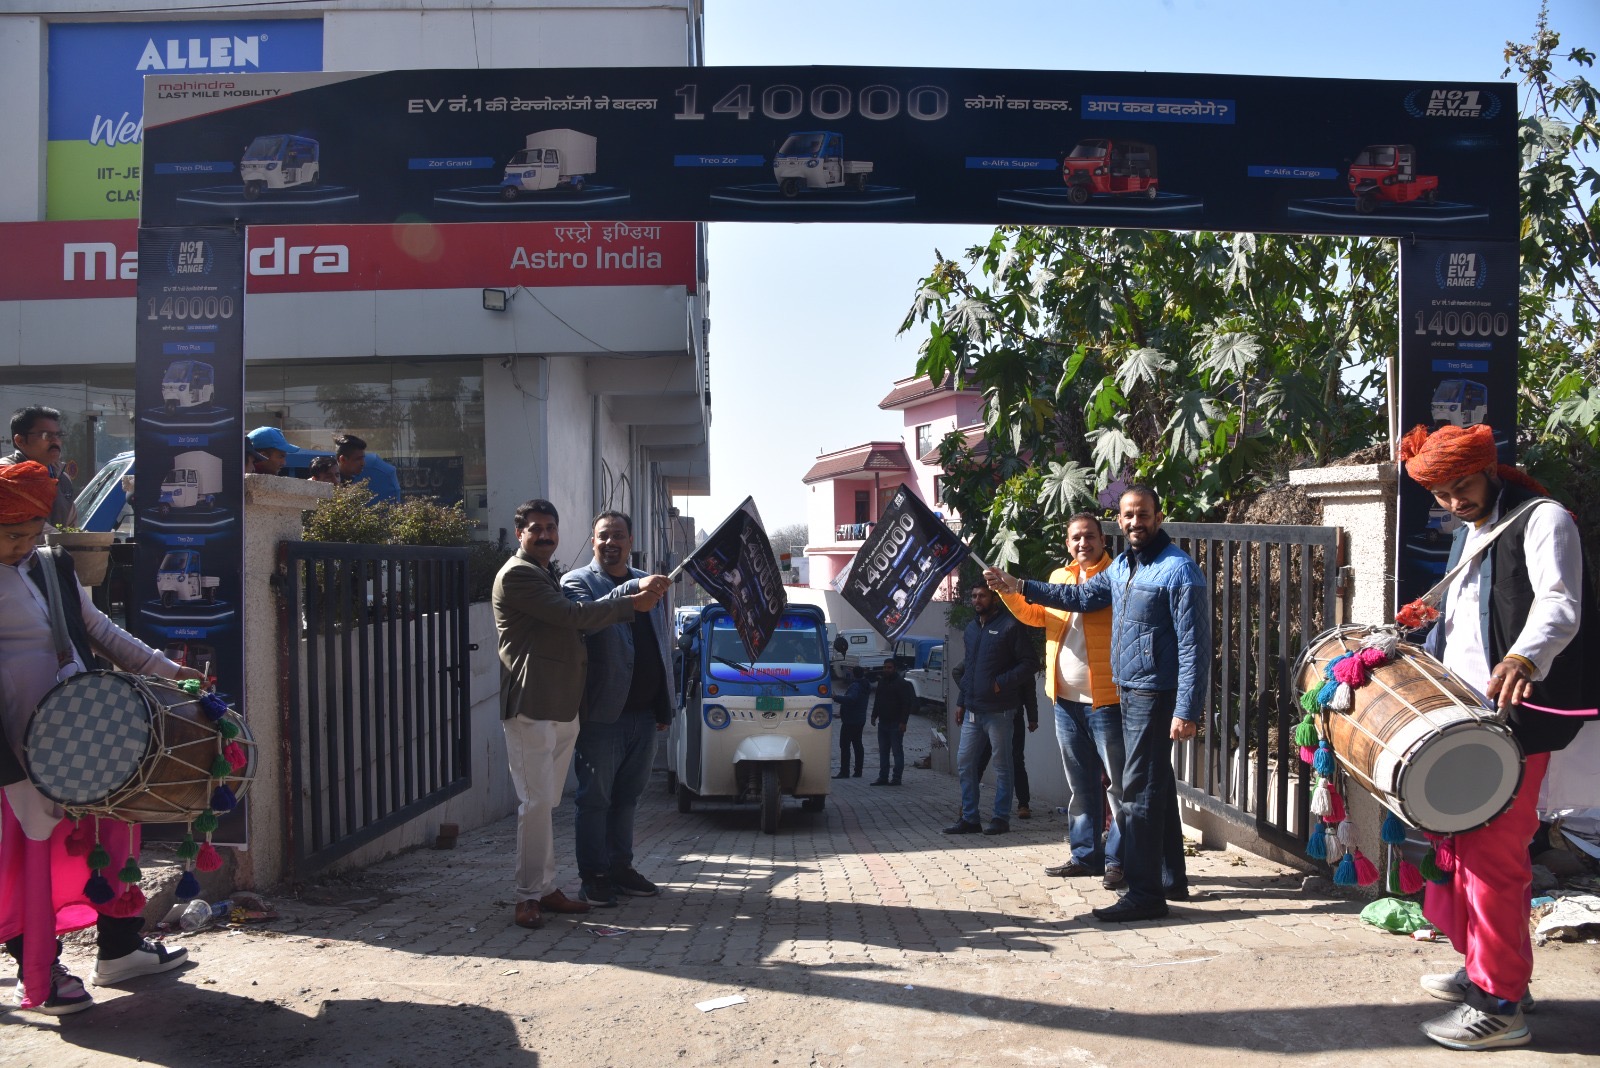 Mahindra Last Mile Mobility celebrates its No.1 electric three-wheeler manufacturer position with EV rallies